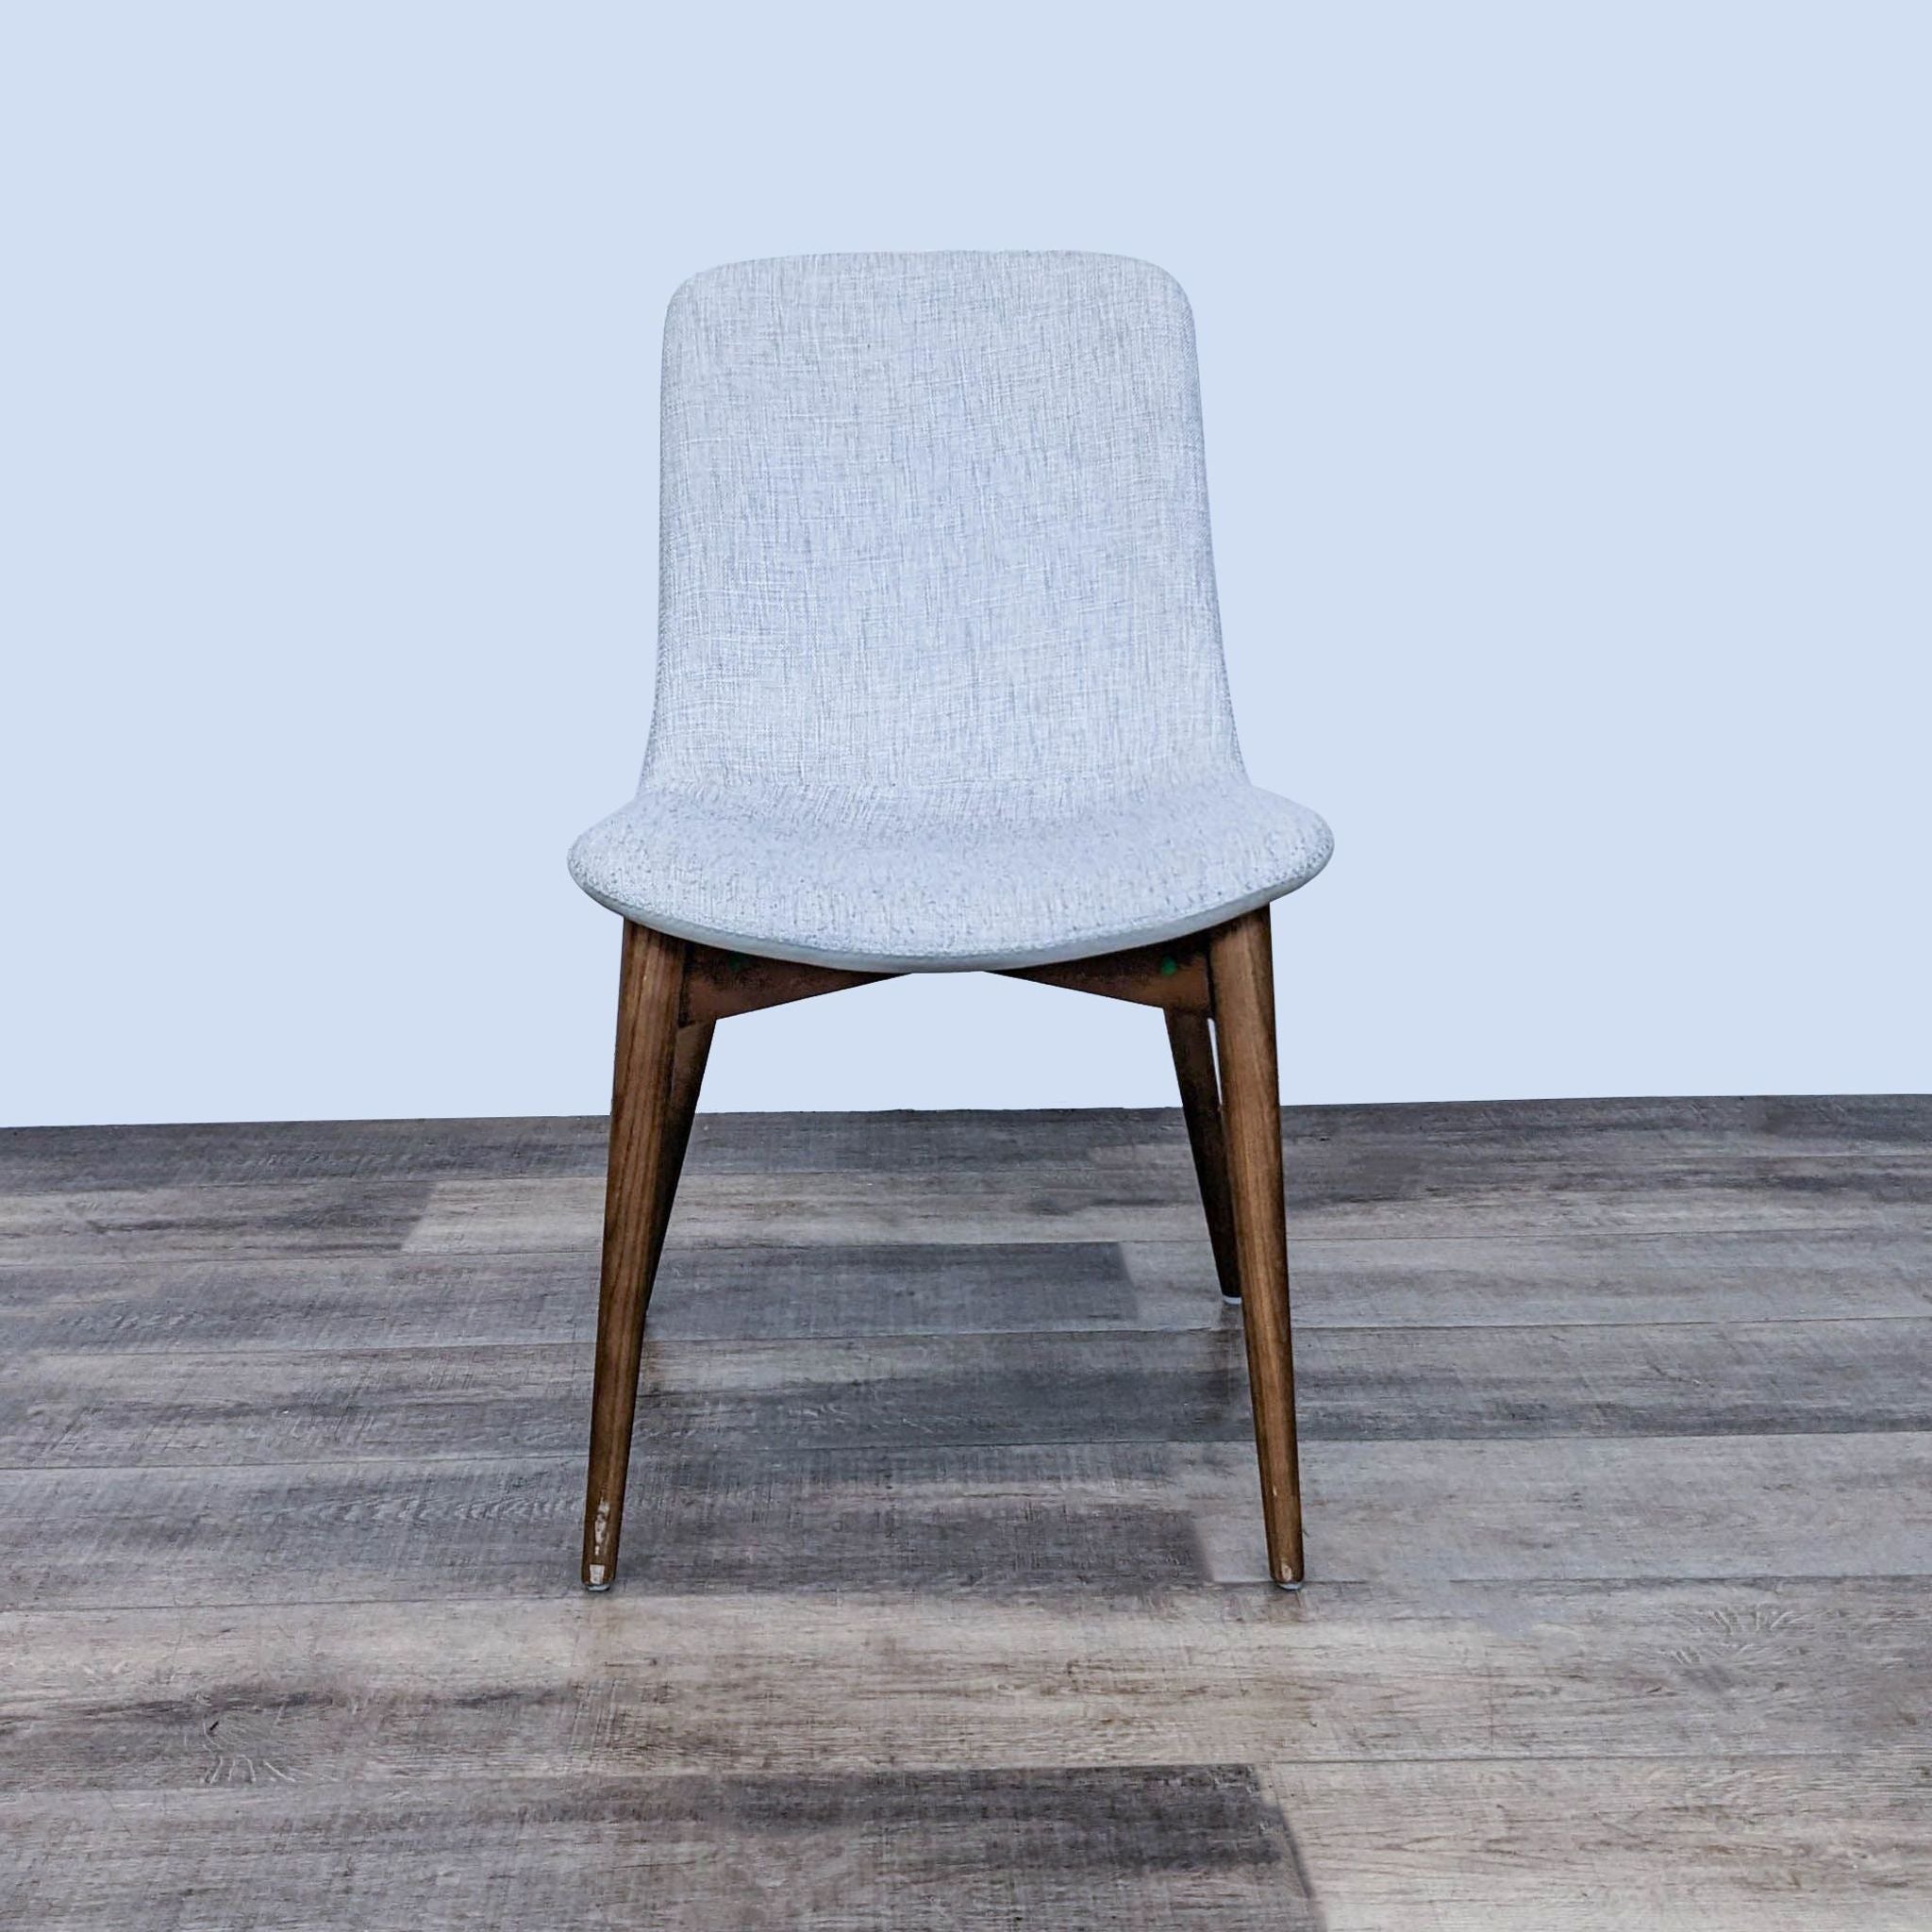 Reperch dining chair with a light fabric padded seat, detailed stitching, and wooden legs, in a natural setting.